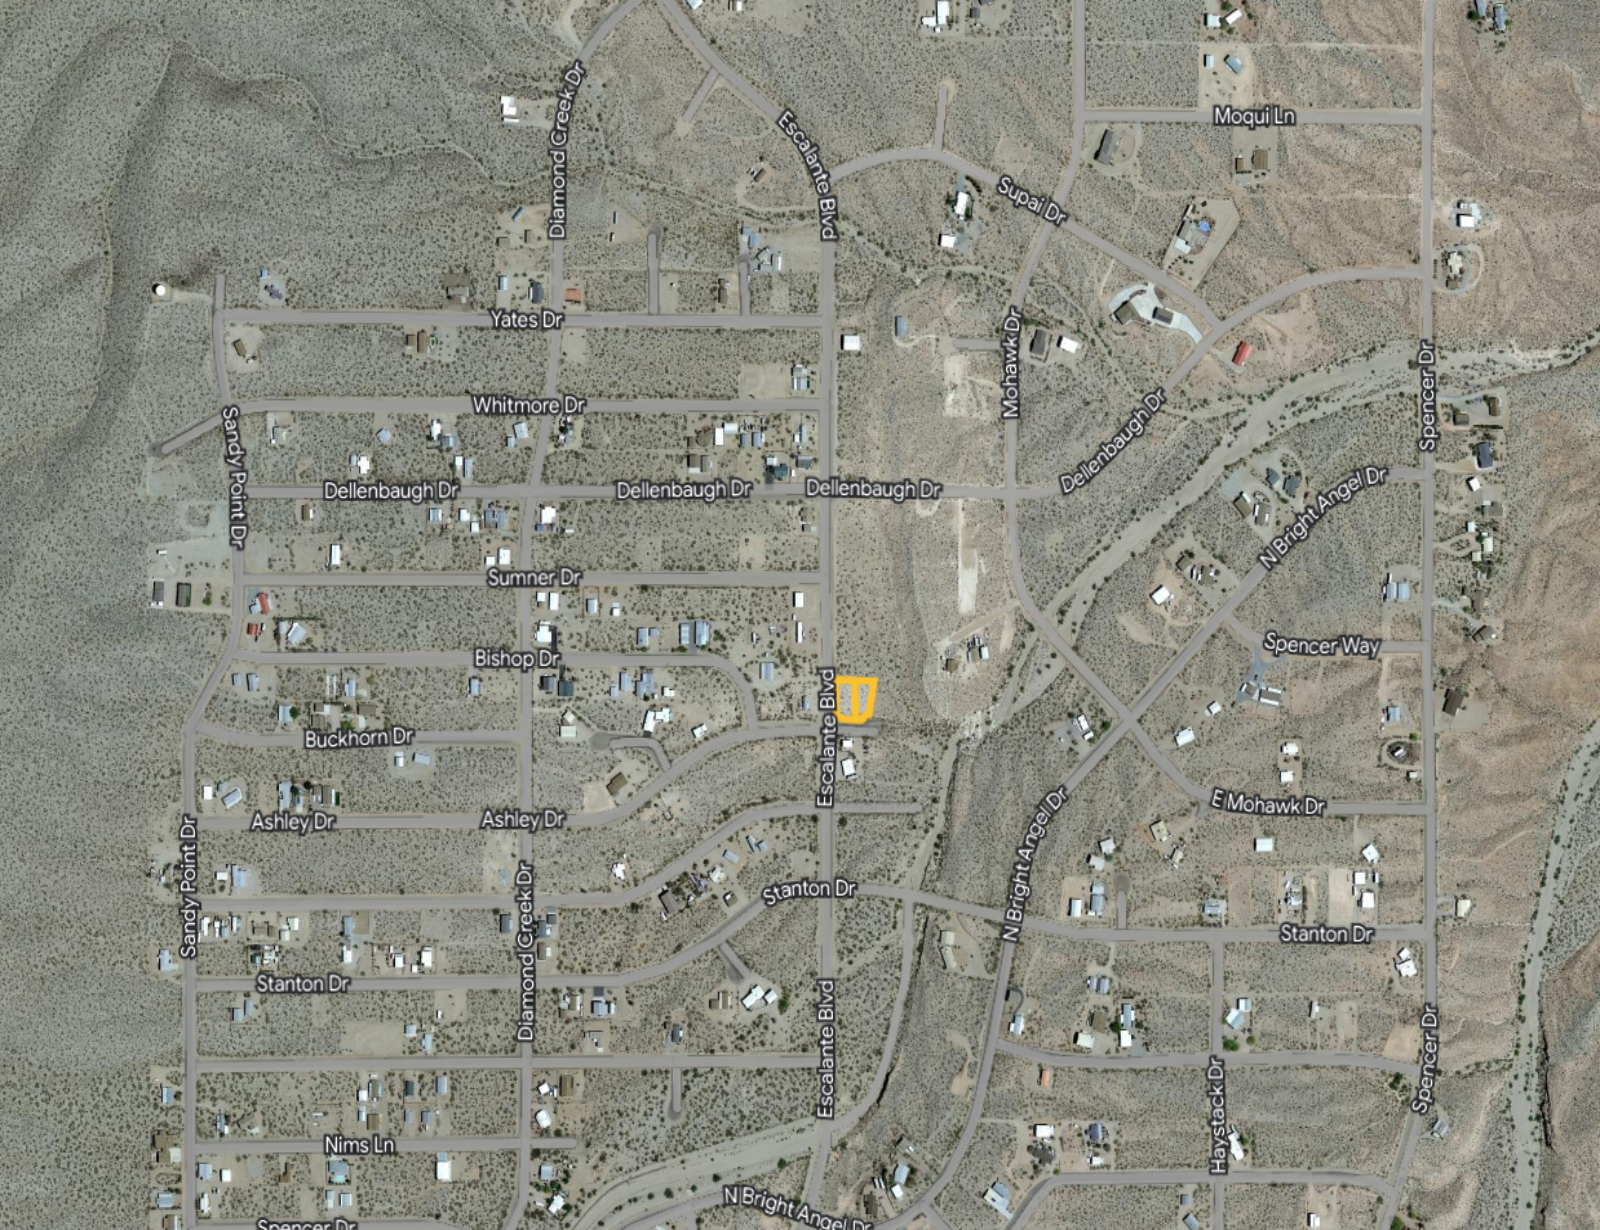 *NEW* MOHAVE COUNTY ARIZONA!! OVERSIZED COMBO RESIDENTIAL LOTS!! LOW MONTHLY PAYMENTS OF $350.00  805 Escalante Ave., Meadview, AZ 86444 APN: 343-23-015 & 343-23-016 - Get Land Today